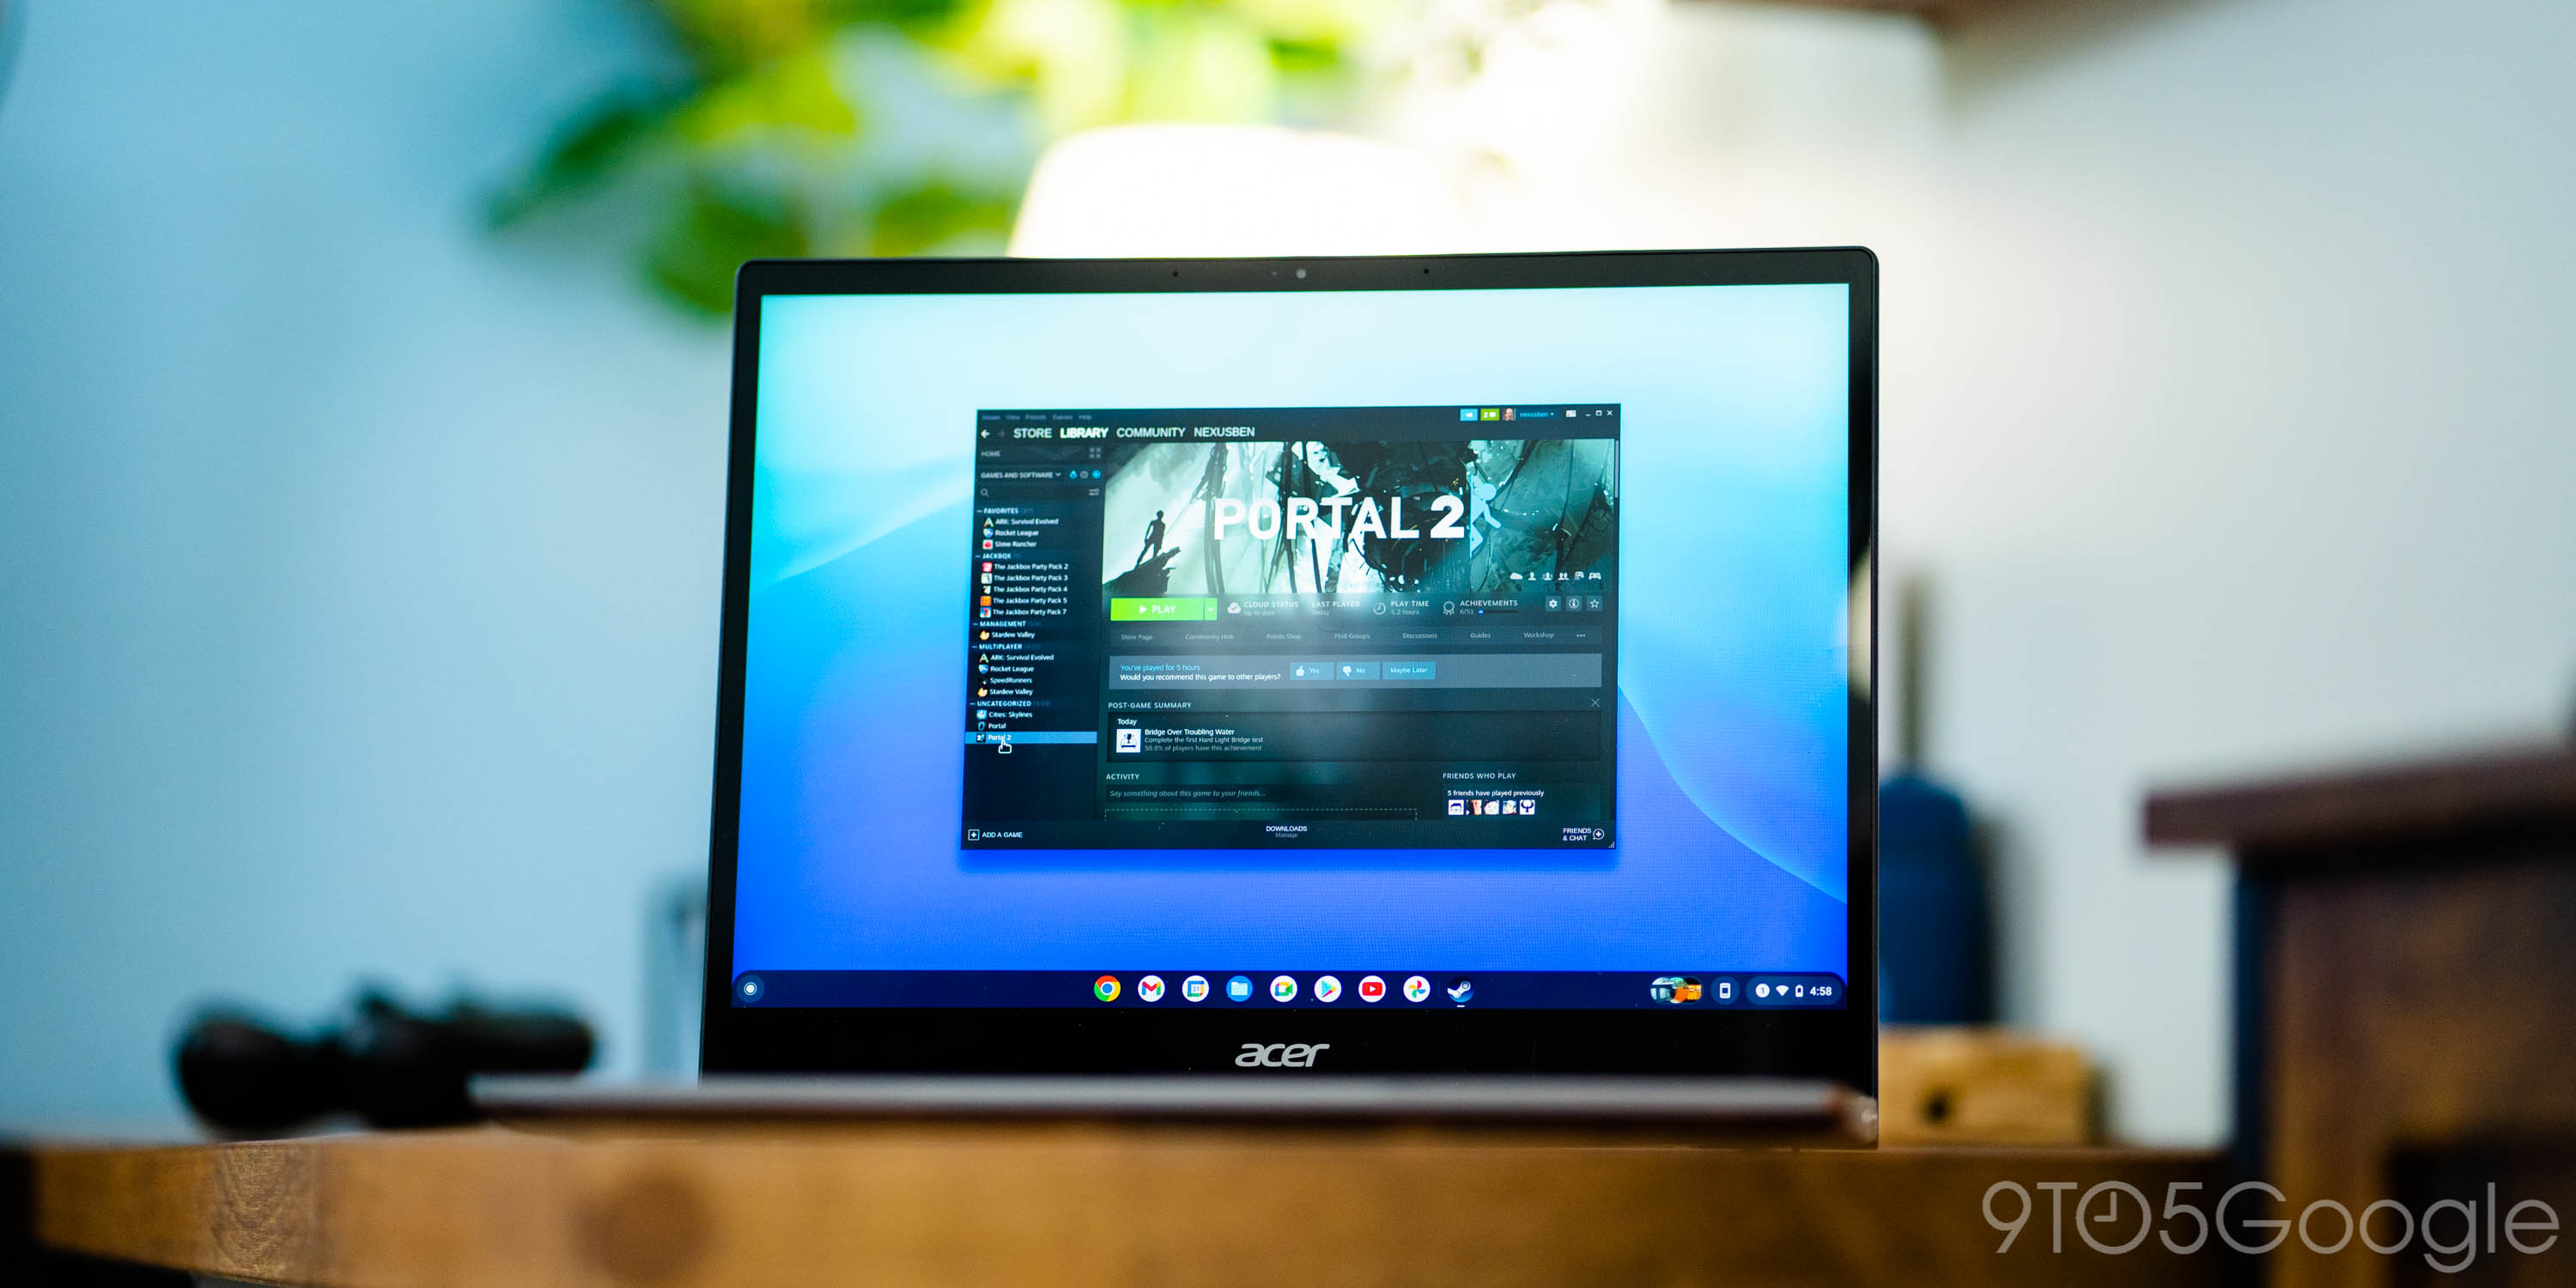 How To Install Epic Games Launcher On Chromebook! 